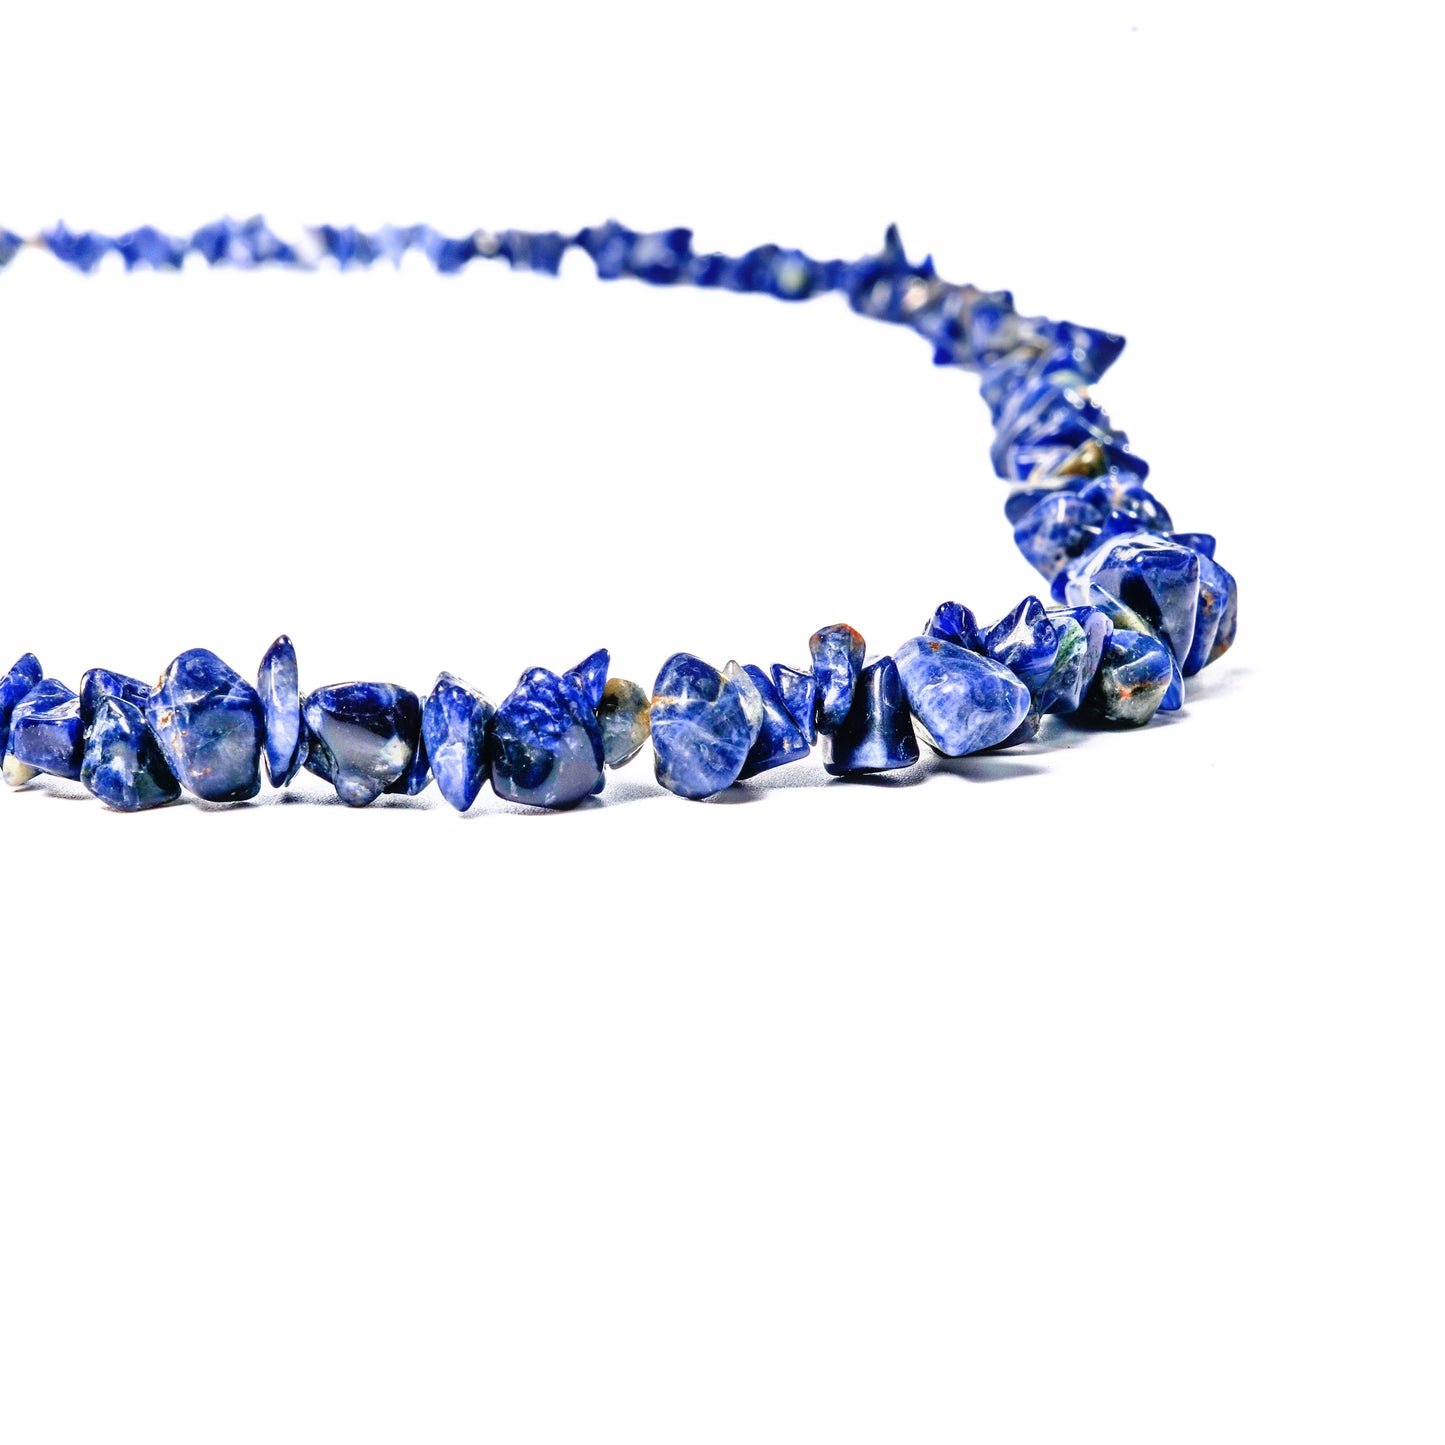 Sodalite Necklace - ACTIVE LISTENING, ATTENTION SPAN WORK